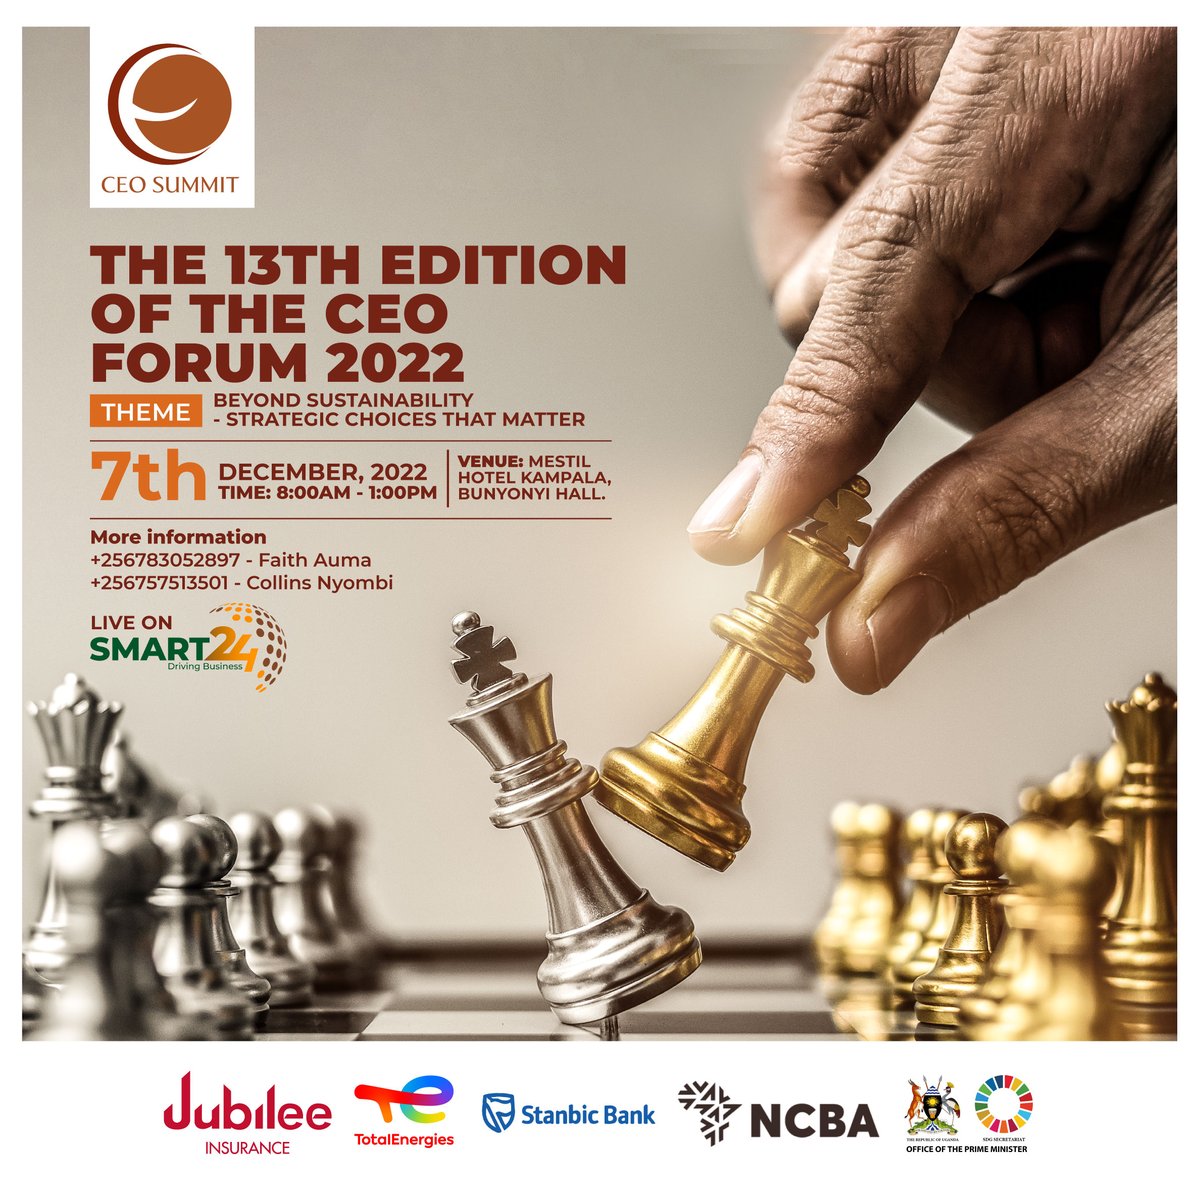 The #CEOForum is back! 

On 7th December, the forum will bring together the most brilliant perspectives & dialogue from business leaders, CEOs & youth entrepreneurs under the theme, 'Beyond sustainability- Strategic Decisions that matter'
Stay tuned to our pages for live updates.